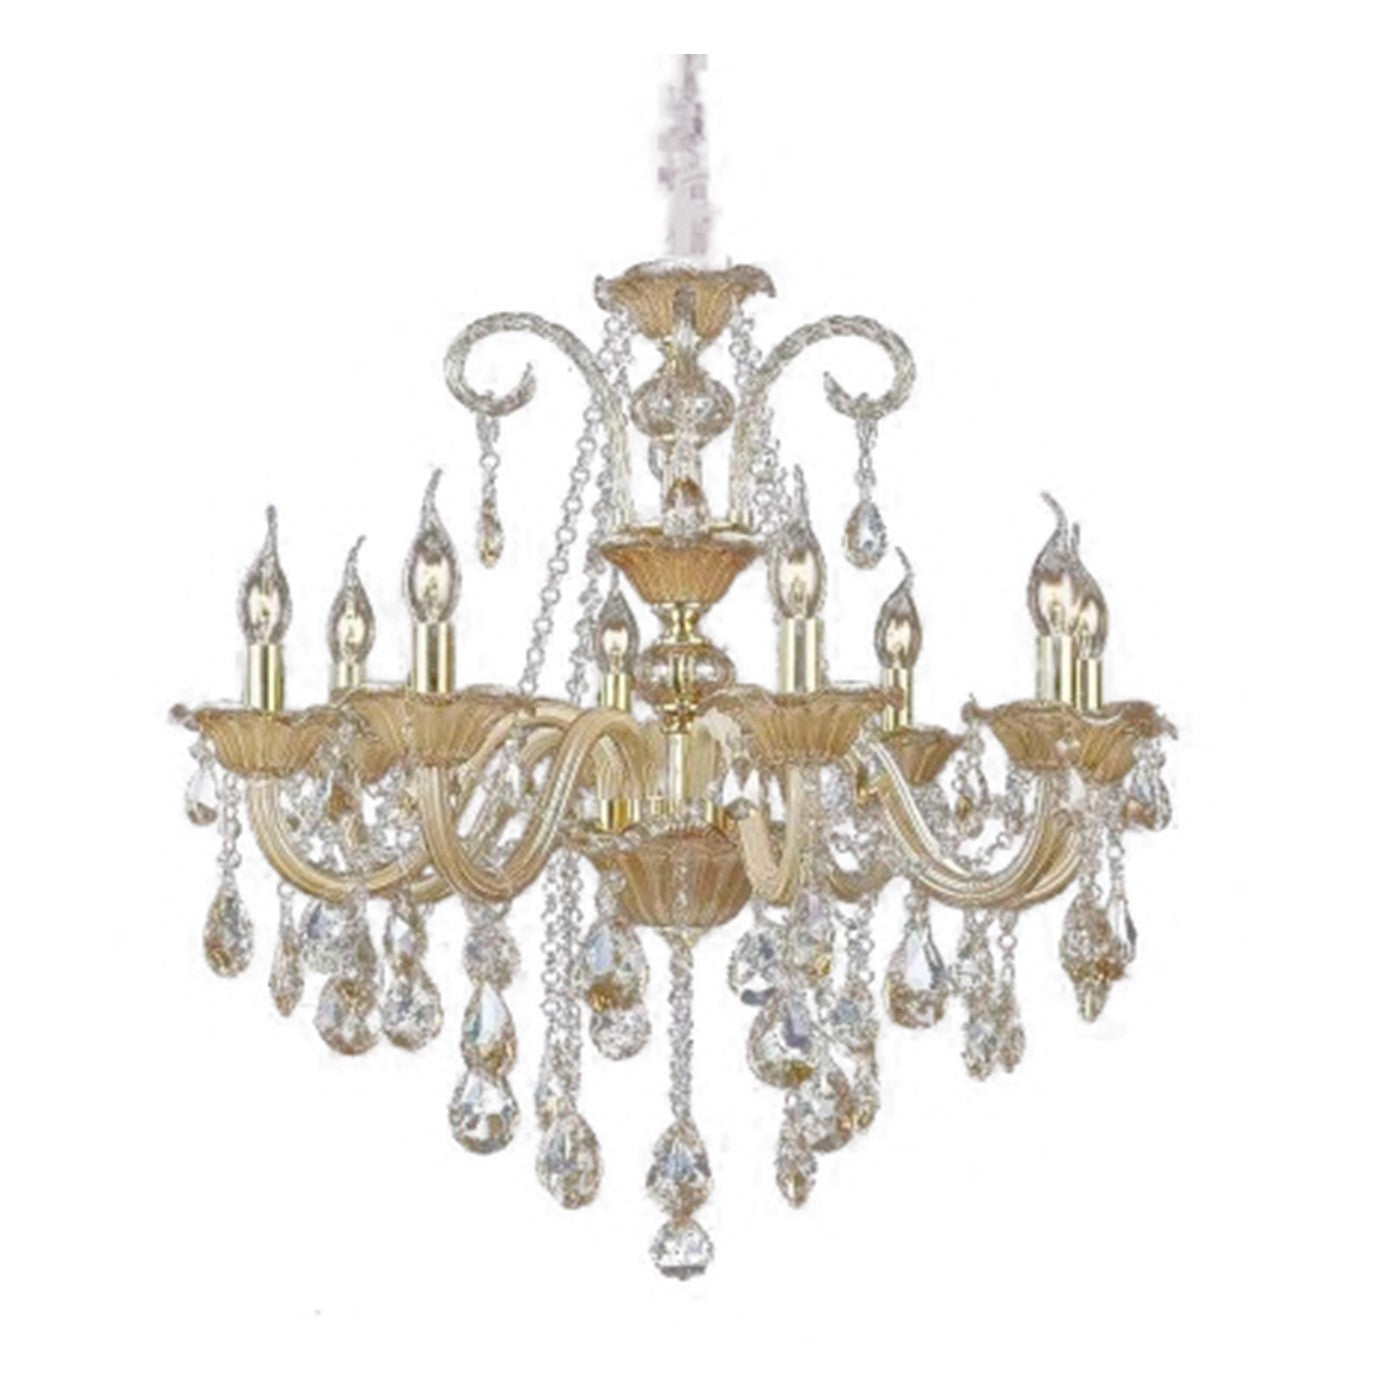 867/8 Candle Arm Chandelier